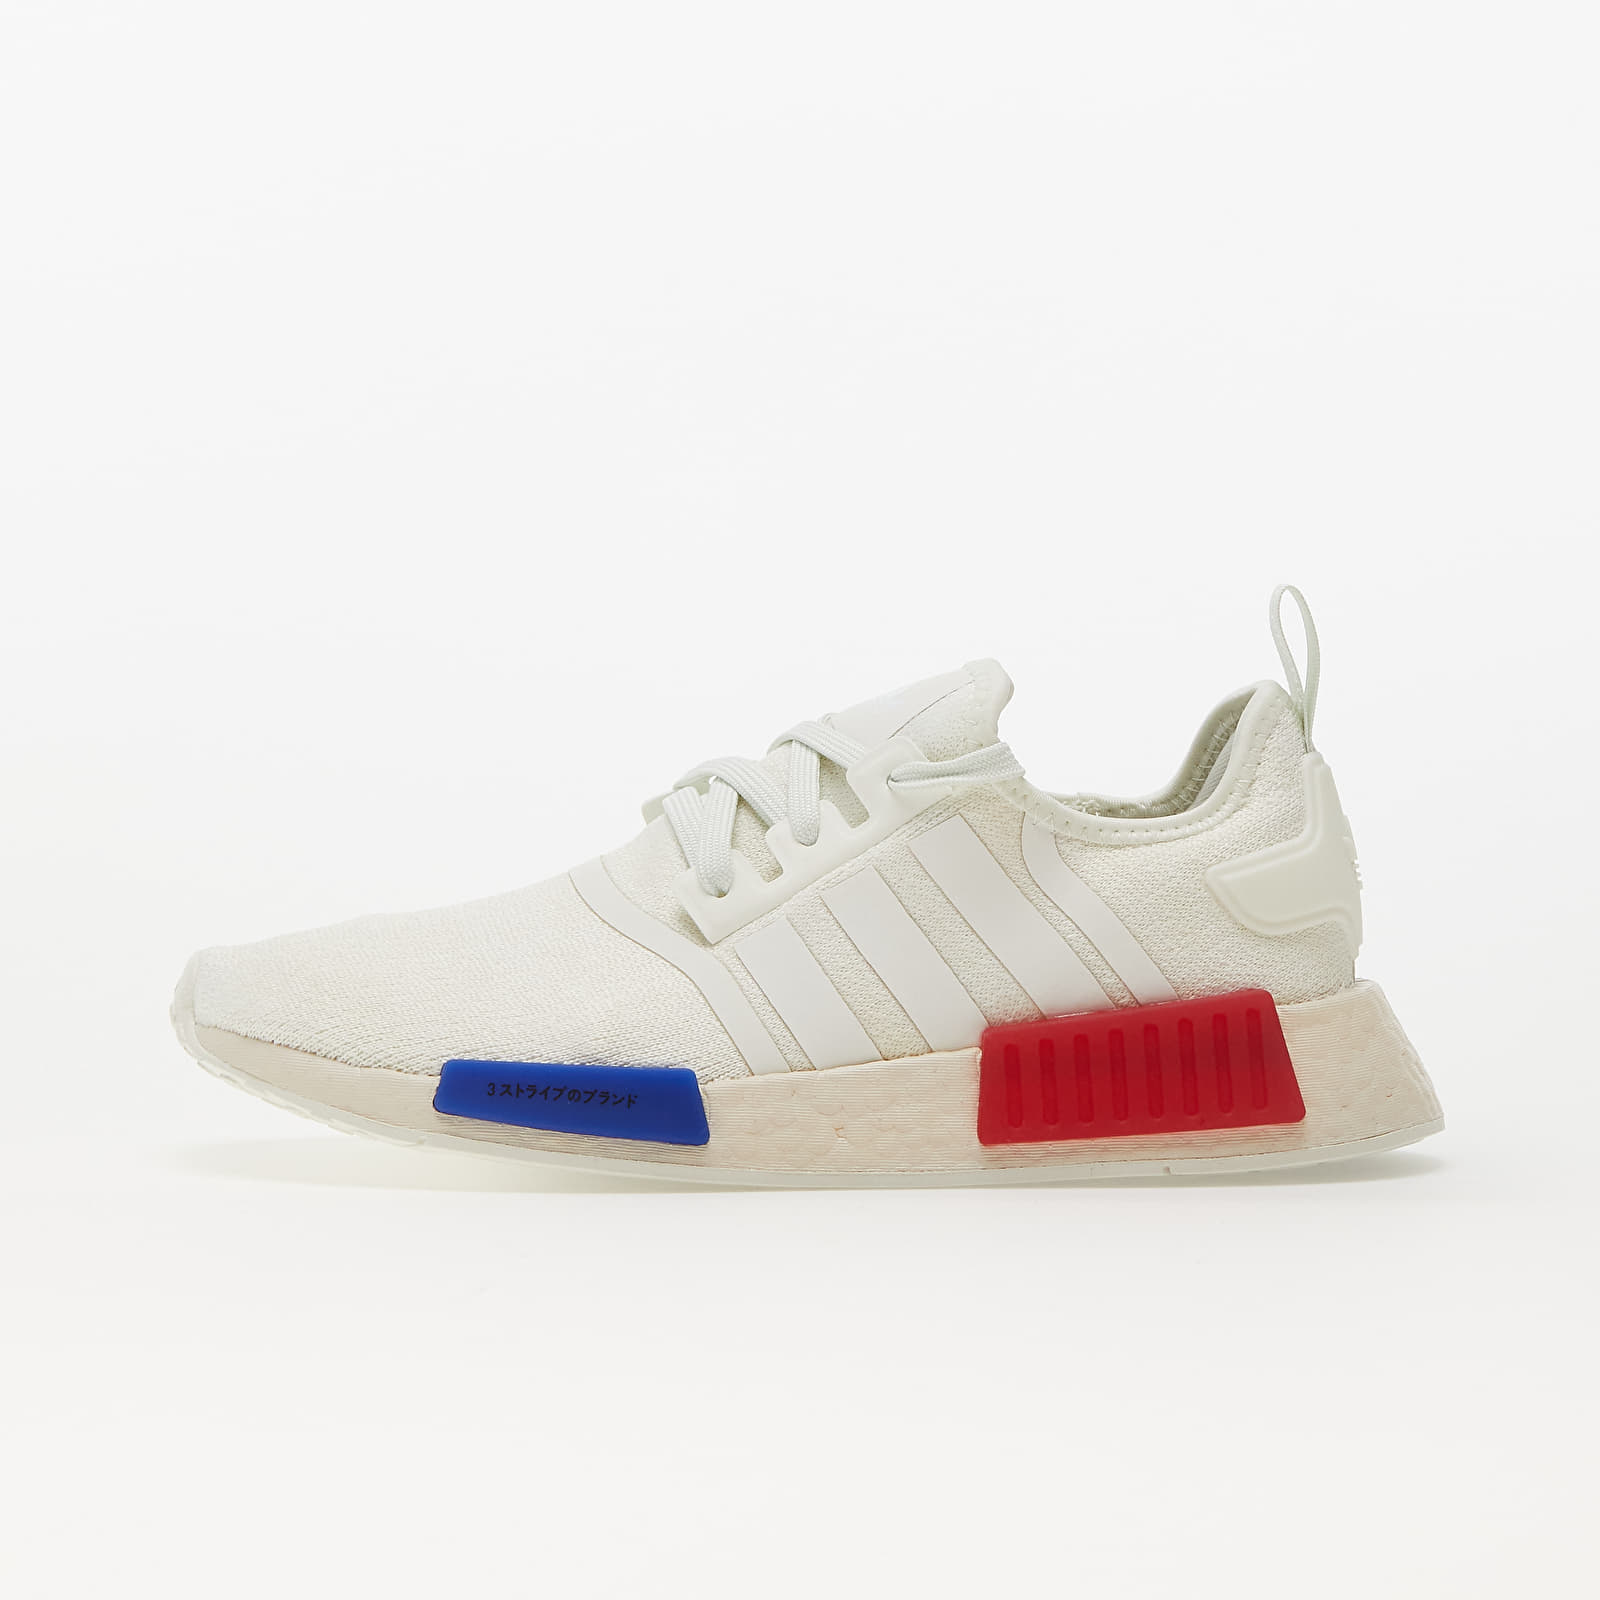 Men's shoes adidas NMD_R1 White Tint